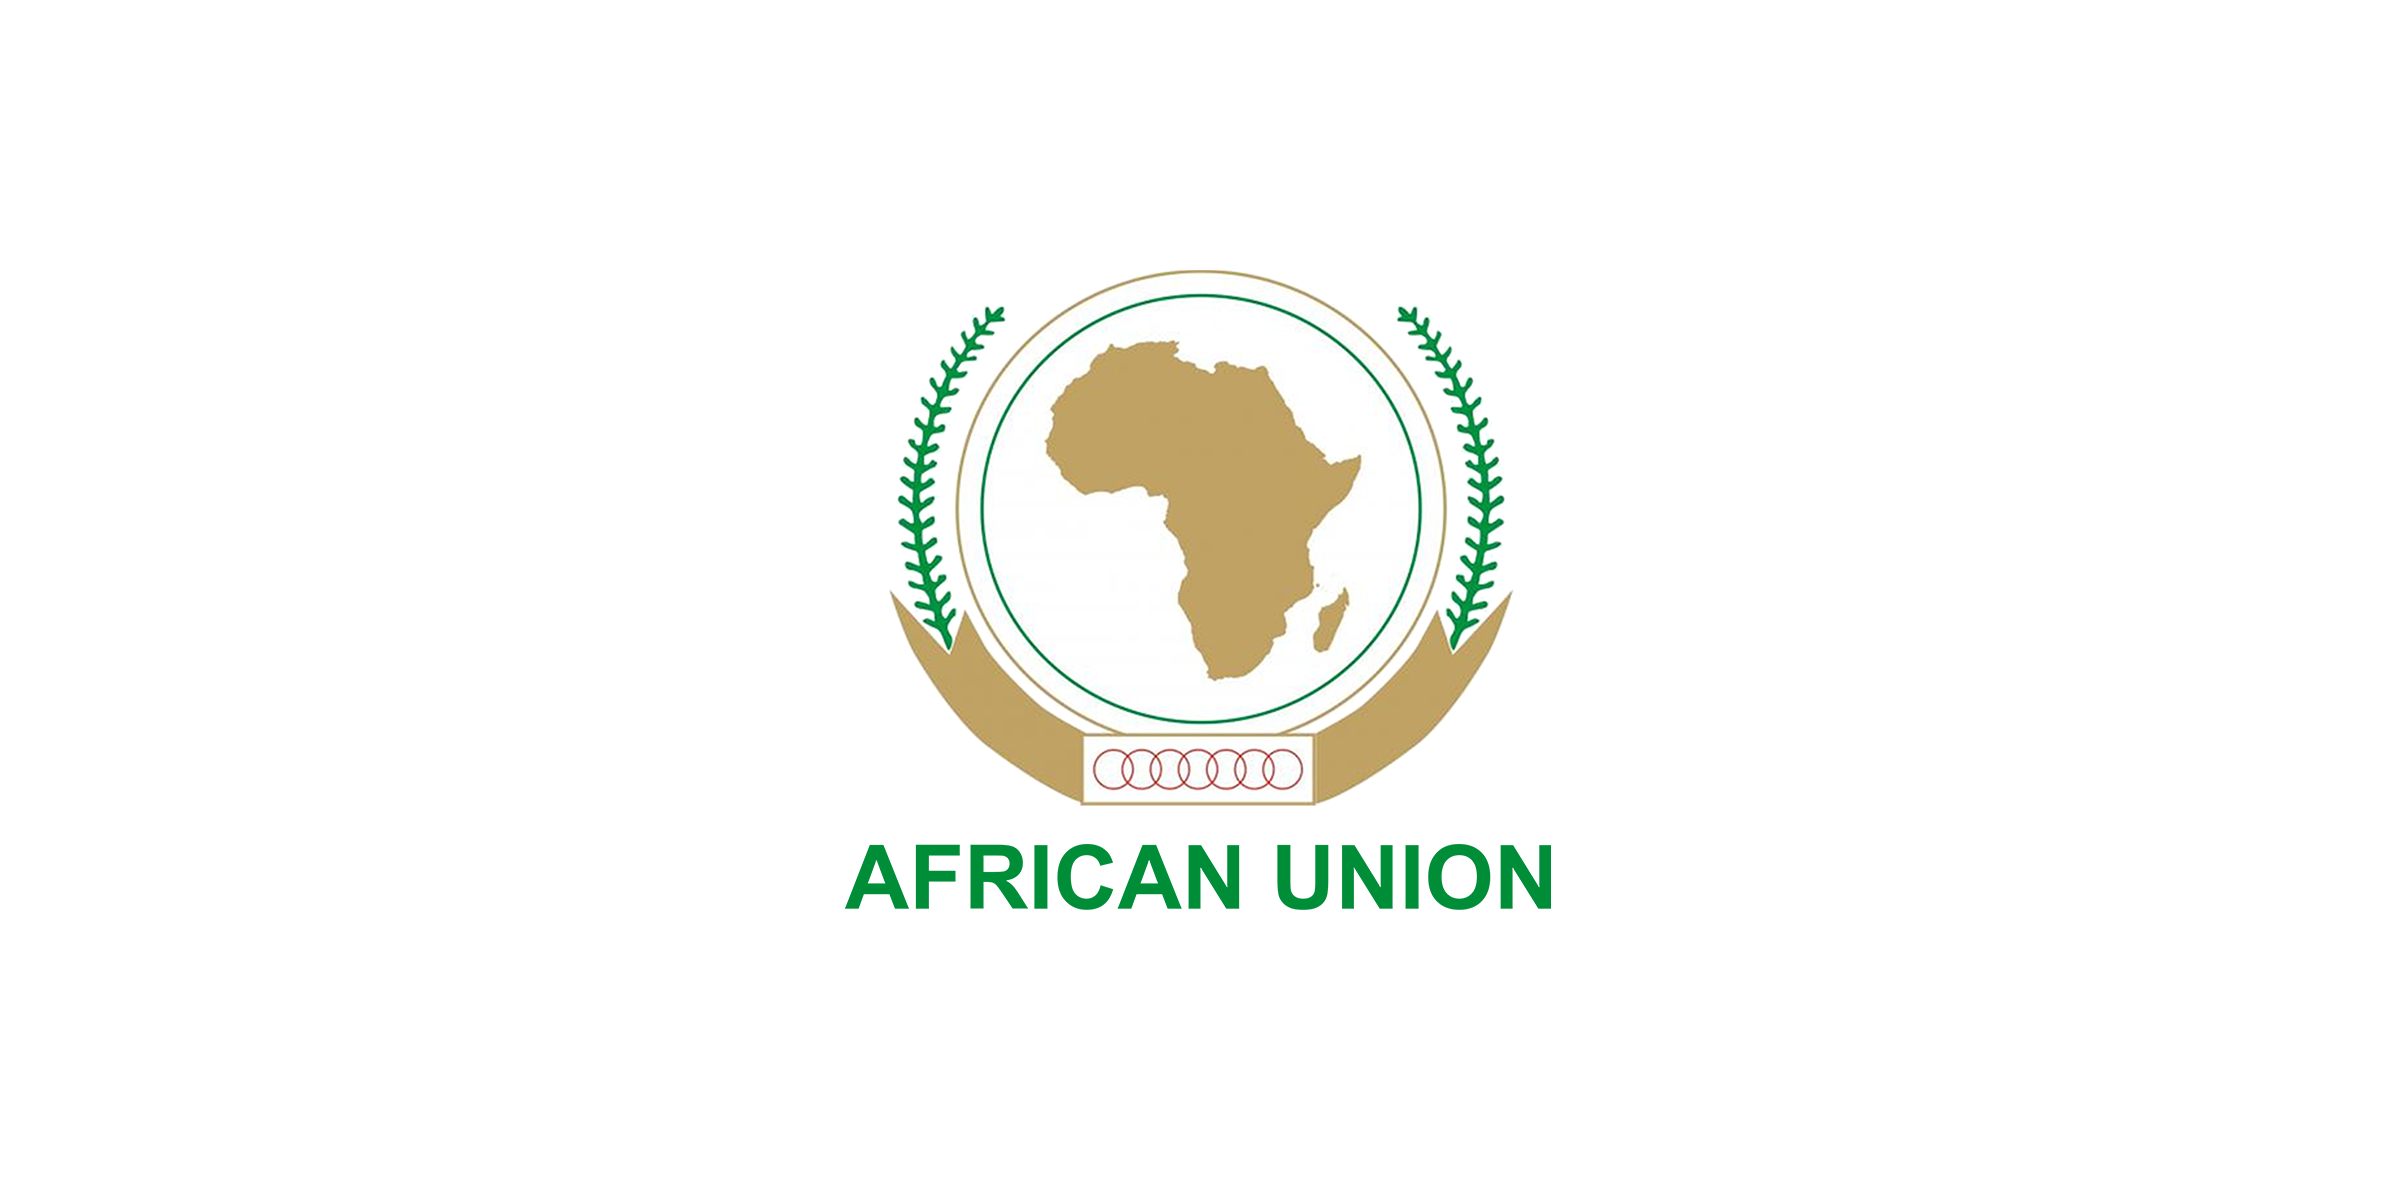 1-African Union.png